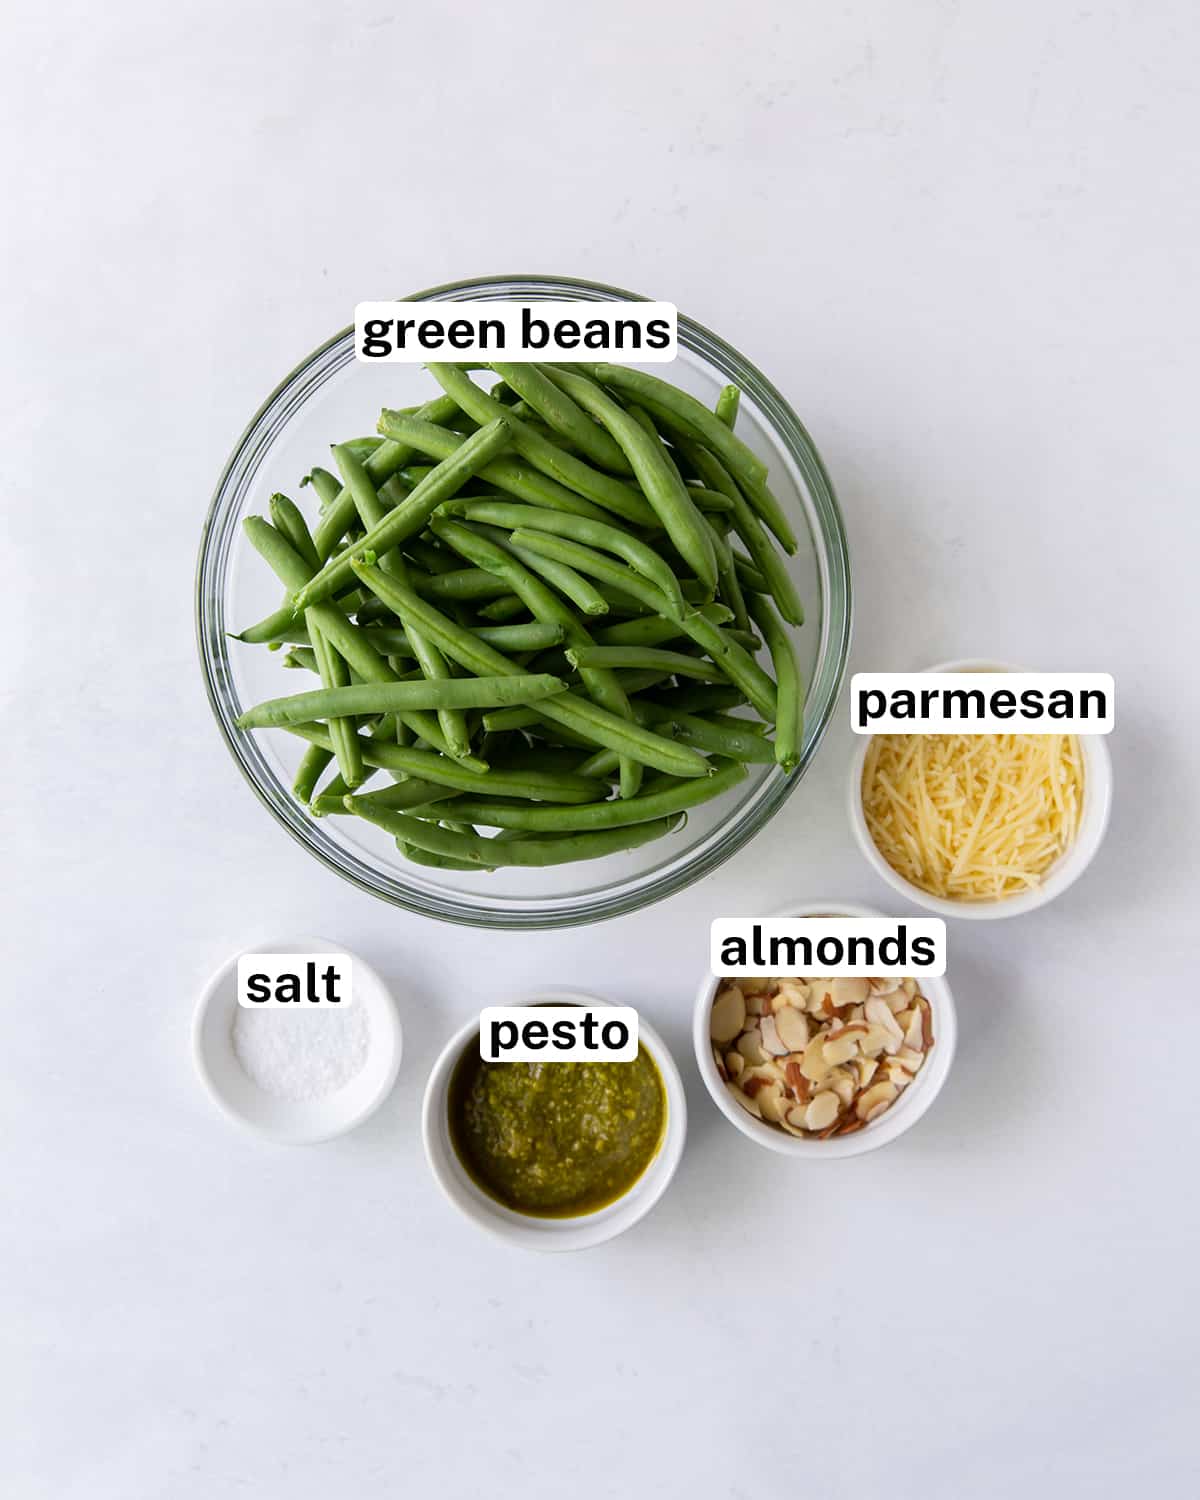 The ingredients for Pesto Green Beans with text overlay.